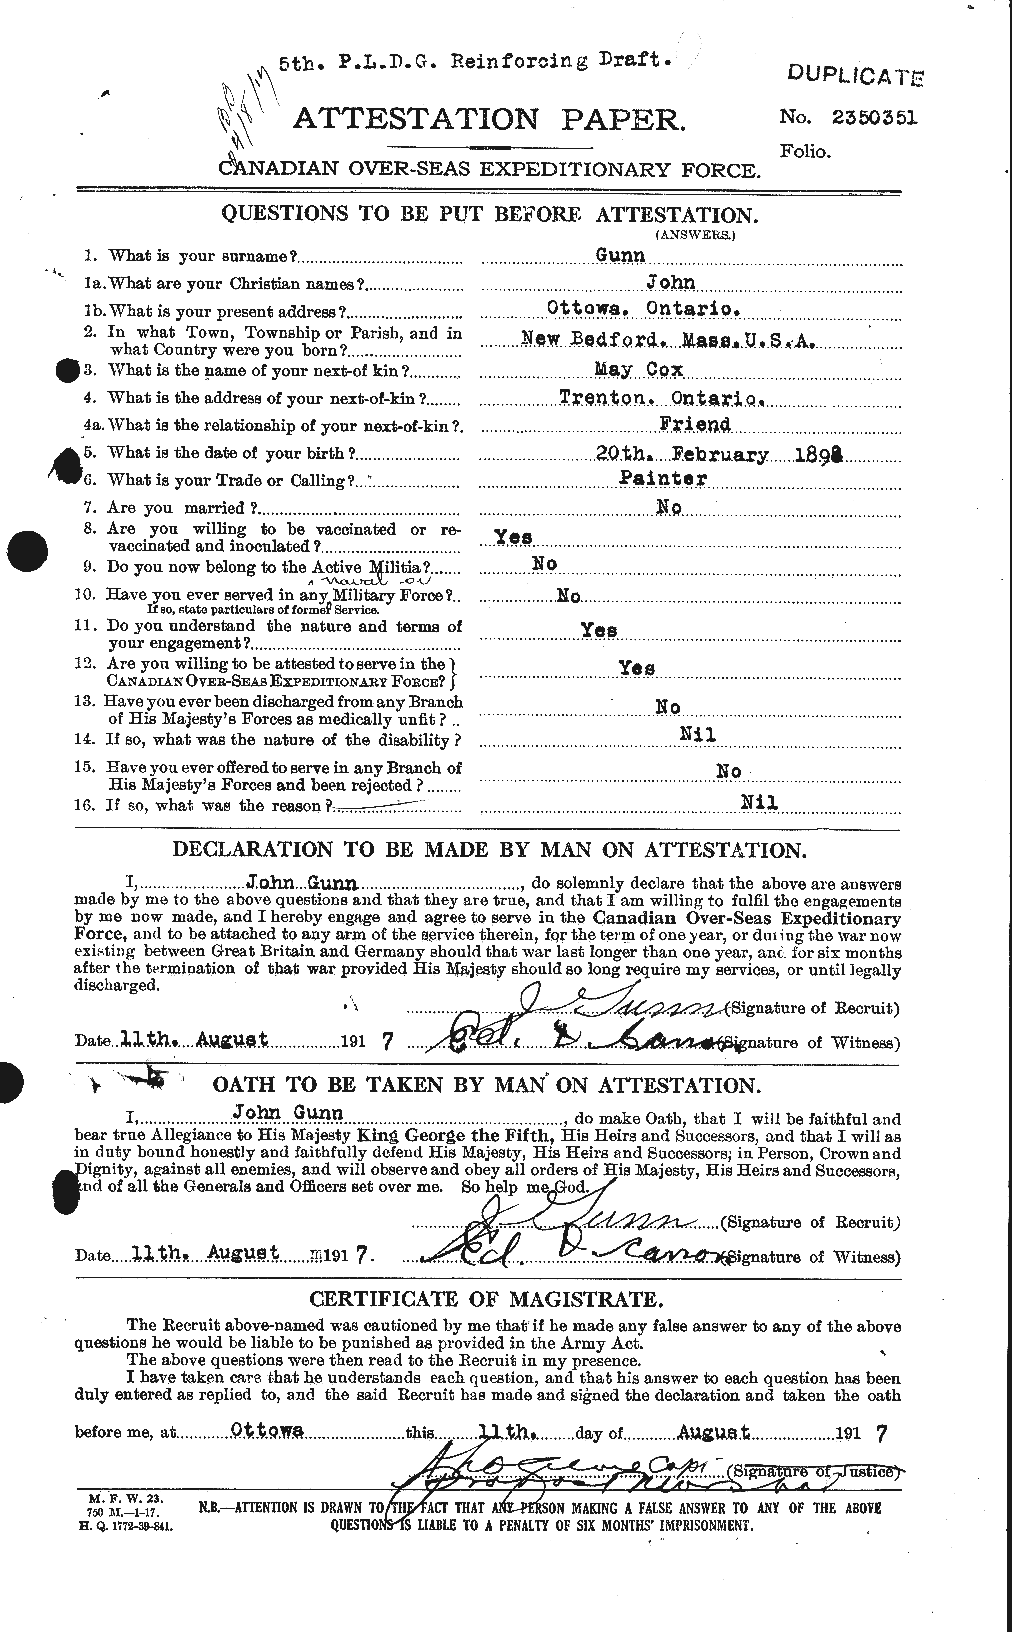 Personnel Records of the First World War - CEF 369284a